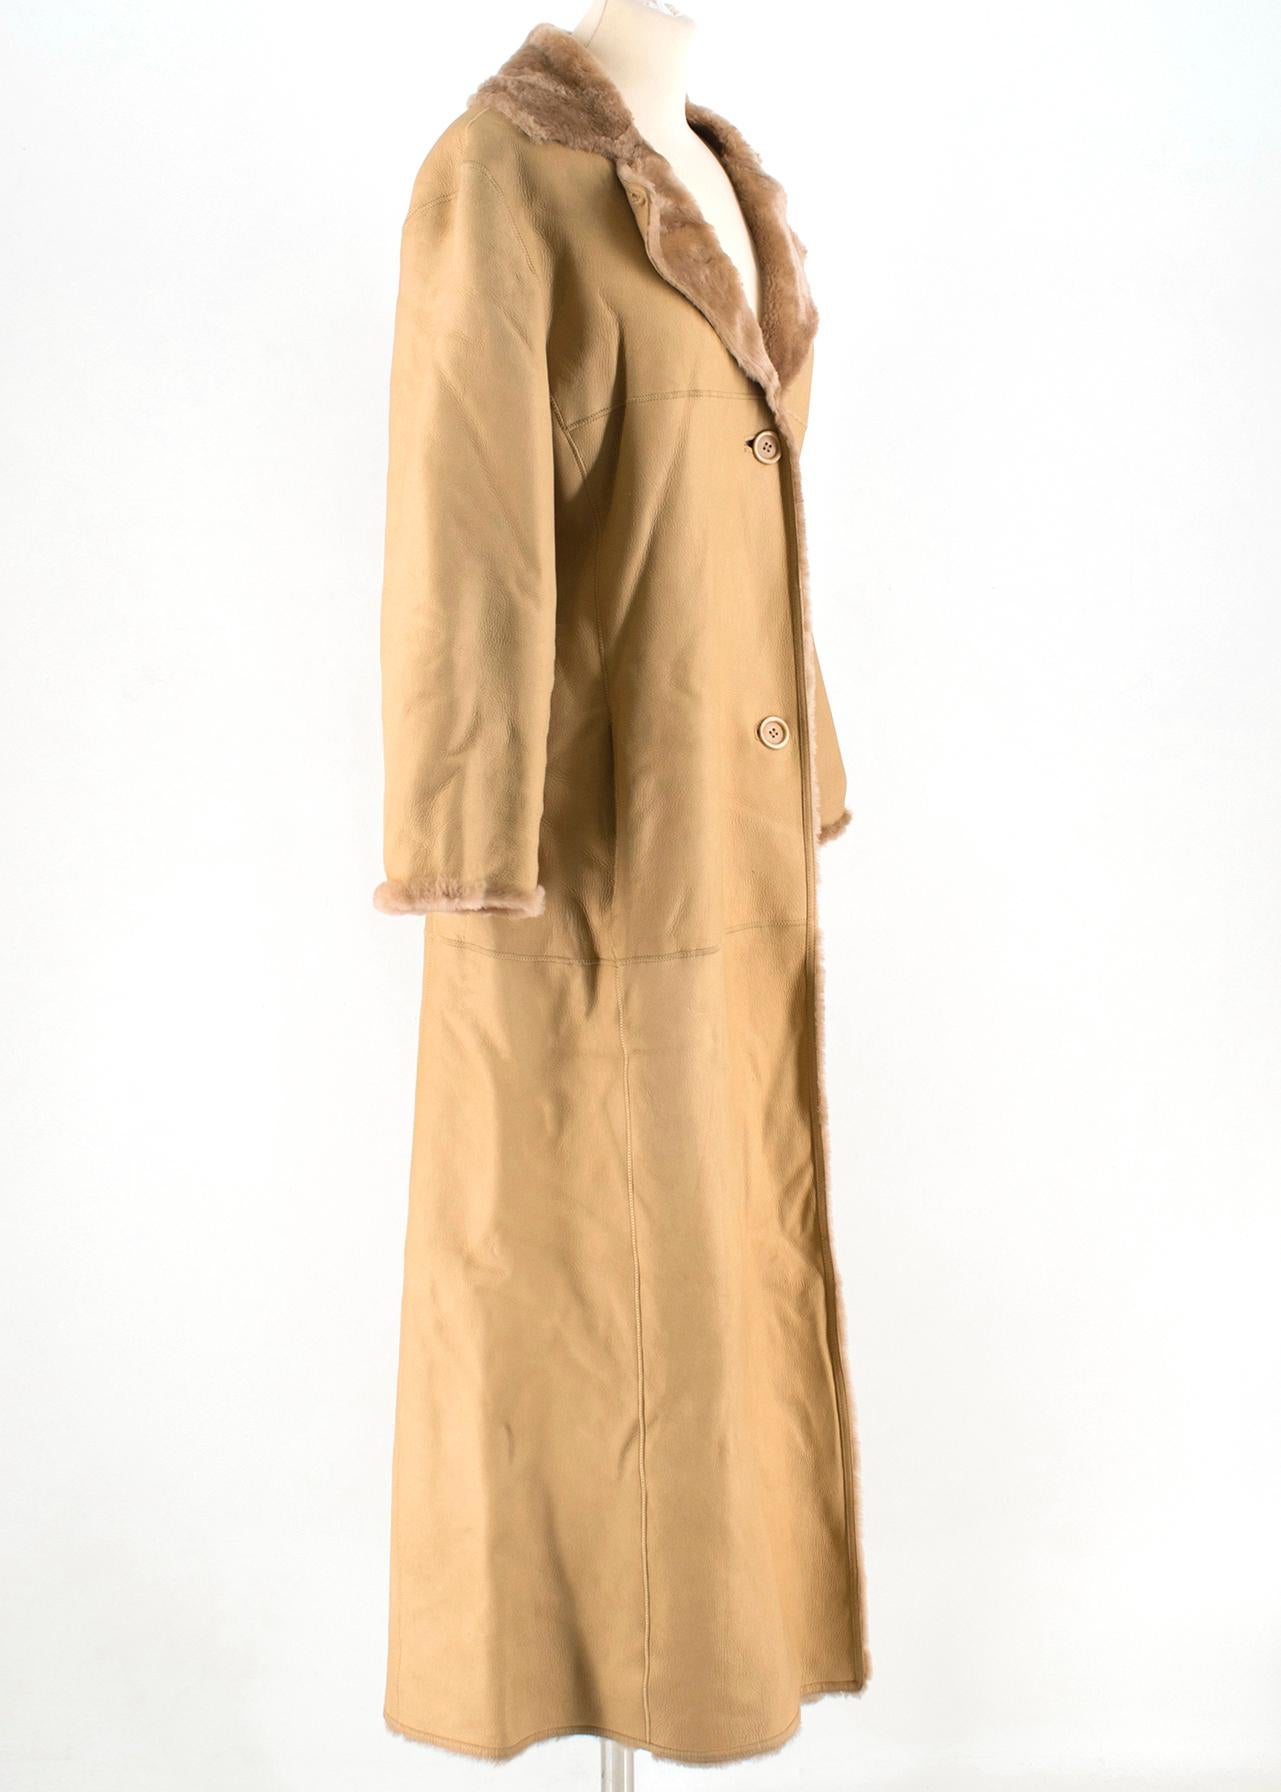 Strenesse Camel Leather Fur Coat

- brown leather coat 
- lamb shelling inside
- button fastening 
- slip pockets 

Please note, these items are pre-owned and may show some signs of storage, even when unworn and unused. This is reflected within the